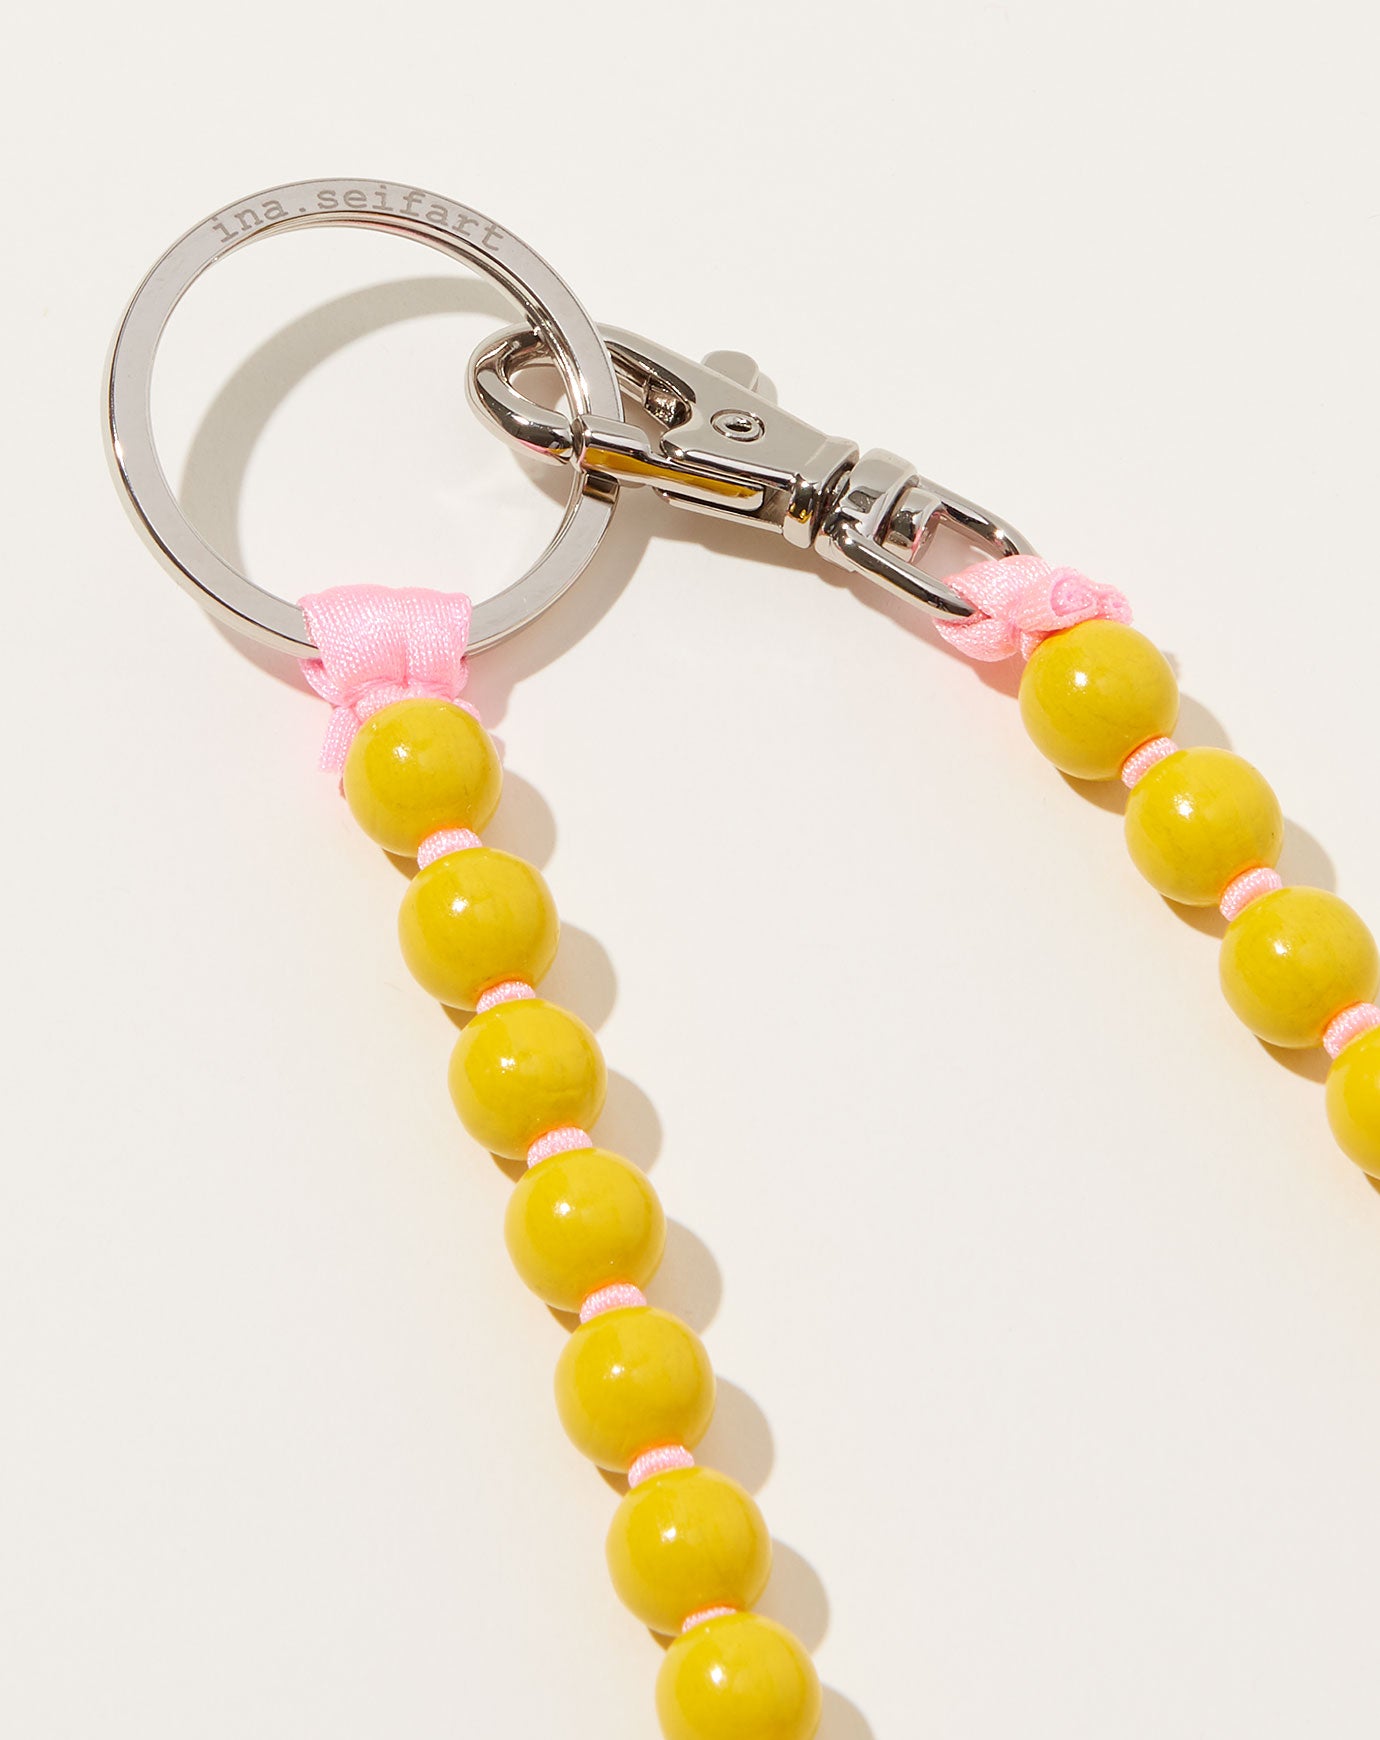 Ina Seifart Perlen Long Keyholder in Yellow on Rose